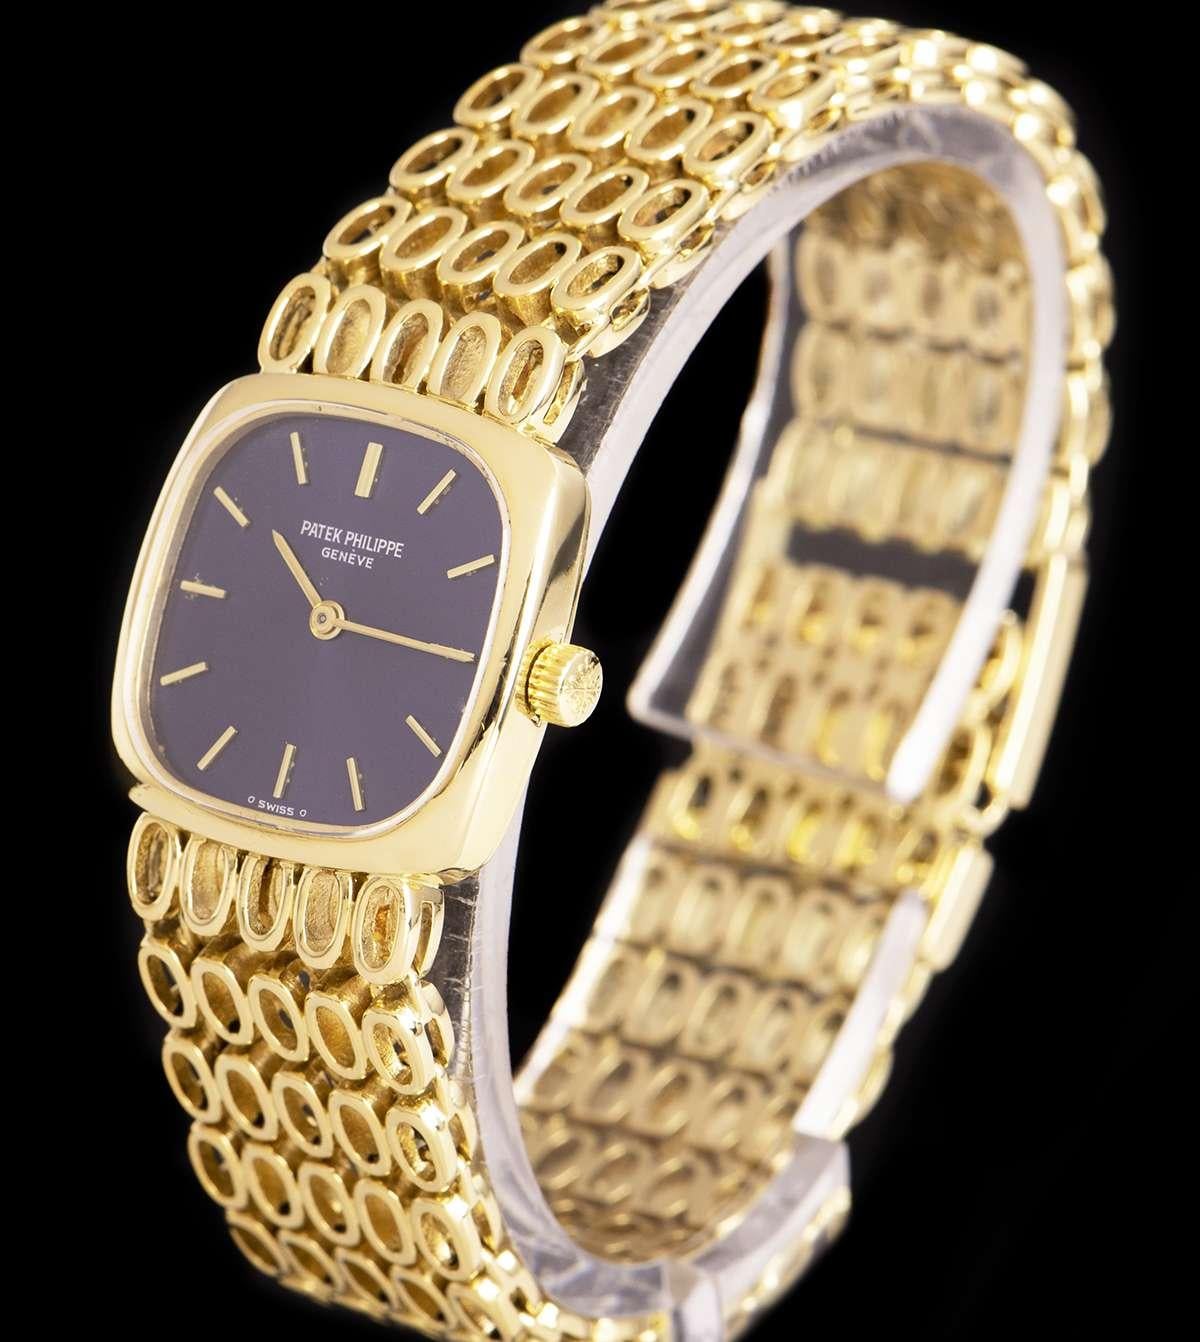 An 18k Yellow Gold Ellipse Vintage Ladies Wristwatch, blue dial with applied hour markers, a fixed 18k yellow gold bezel, an 18k yellow gold bracelet with an 18k yellow gold jewellery style clasp, sapphire glass, manual wind movement, in excellent